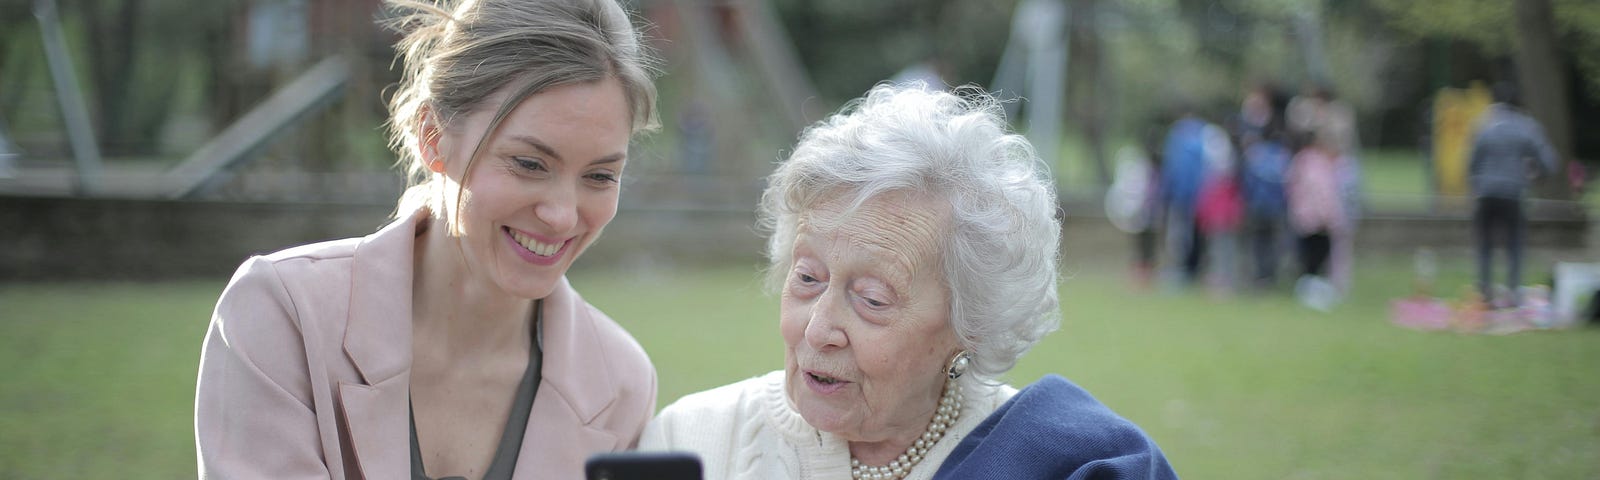 A woman in her 30s helps an elderly woman with something on her phone.